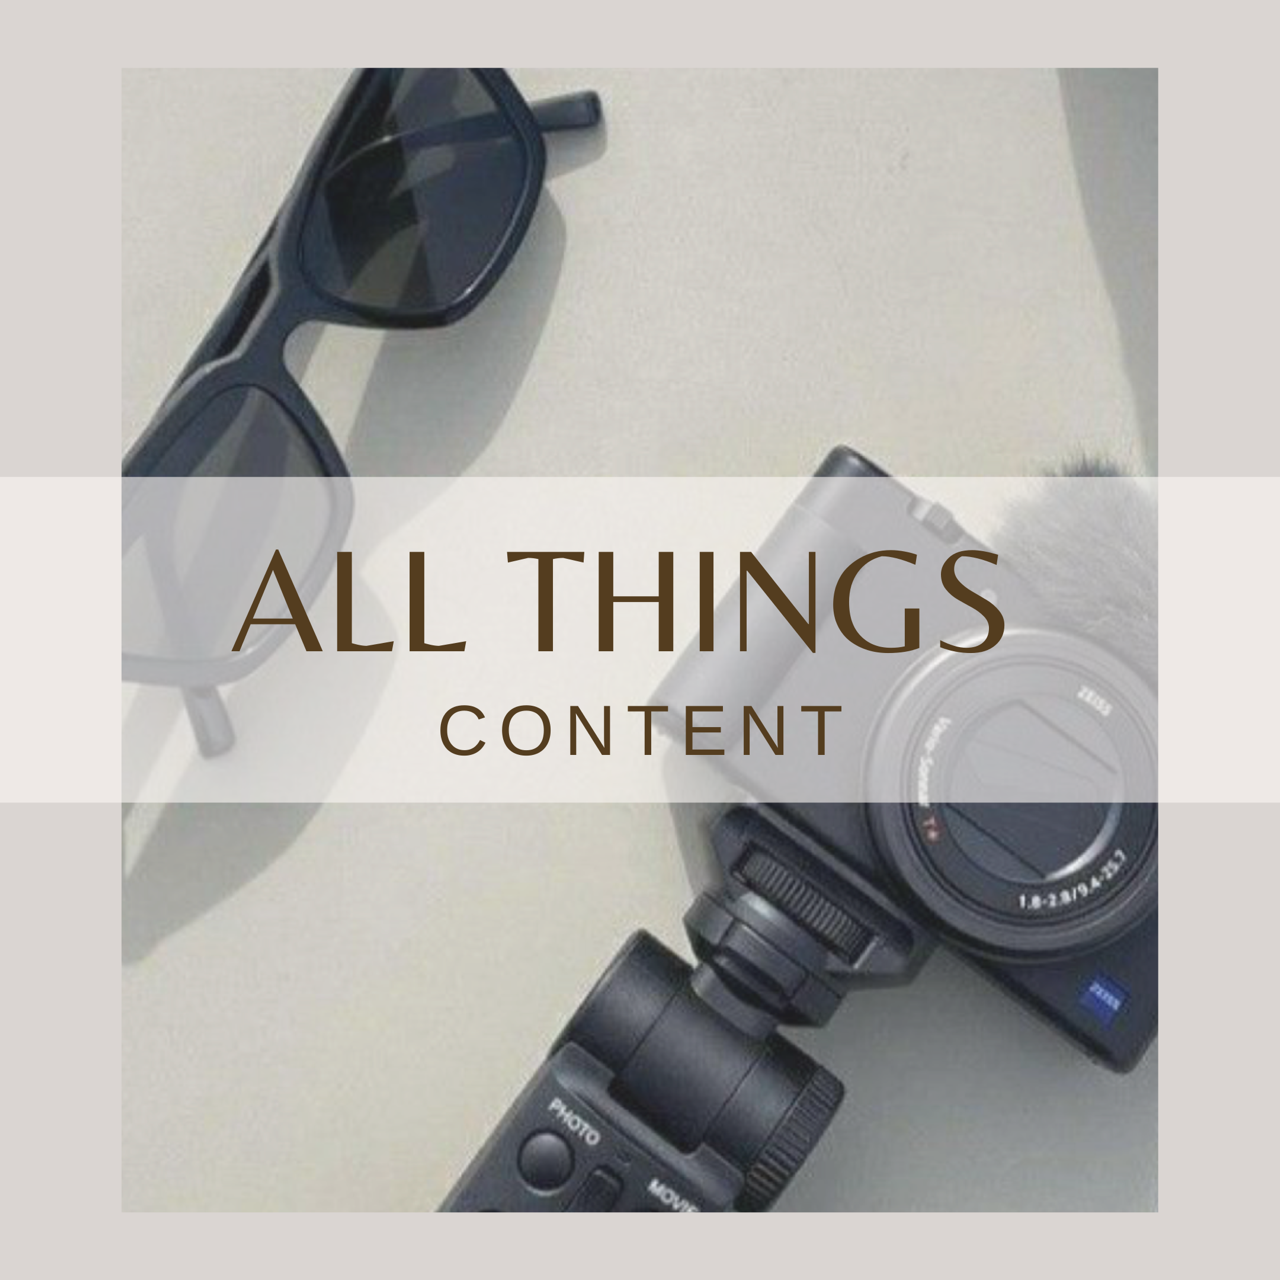 All Things Content